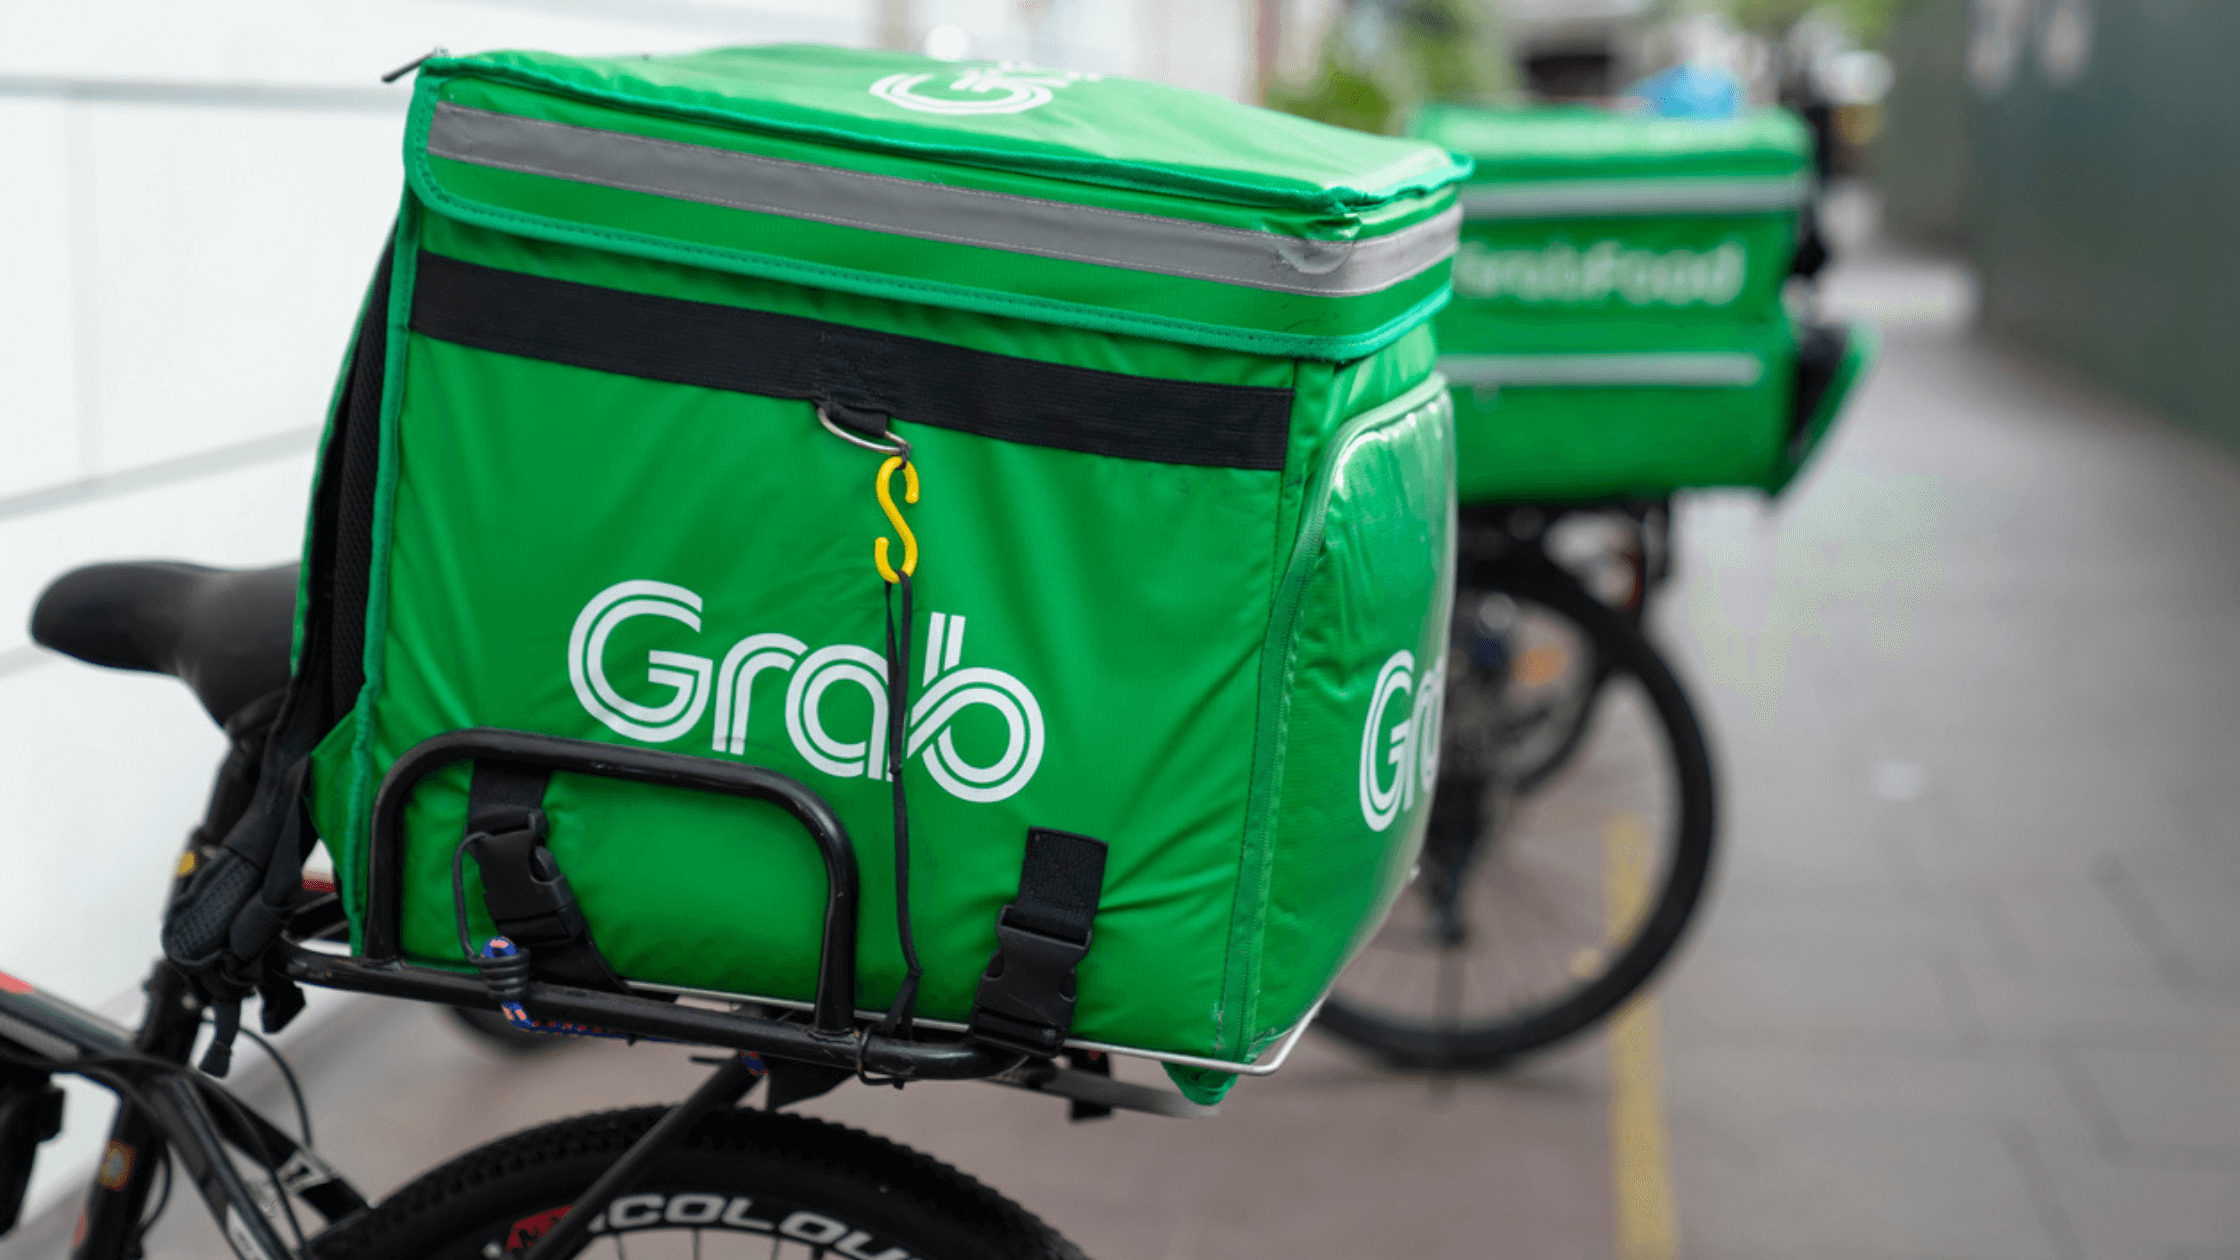 Grab Shares: How Did It Perform in Its Latest Q2 2023 Earnings?